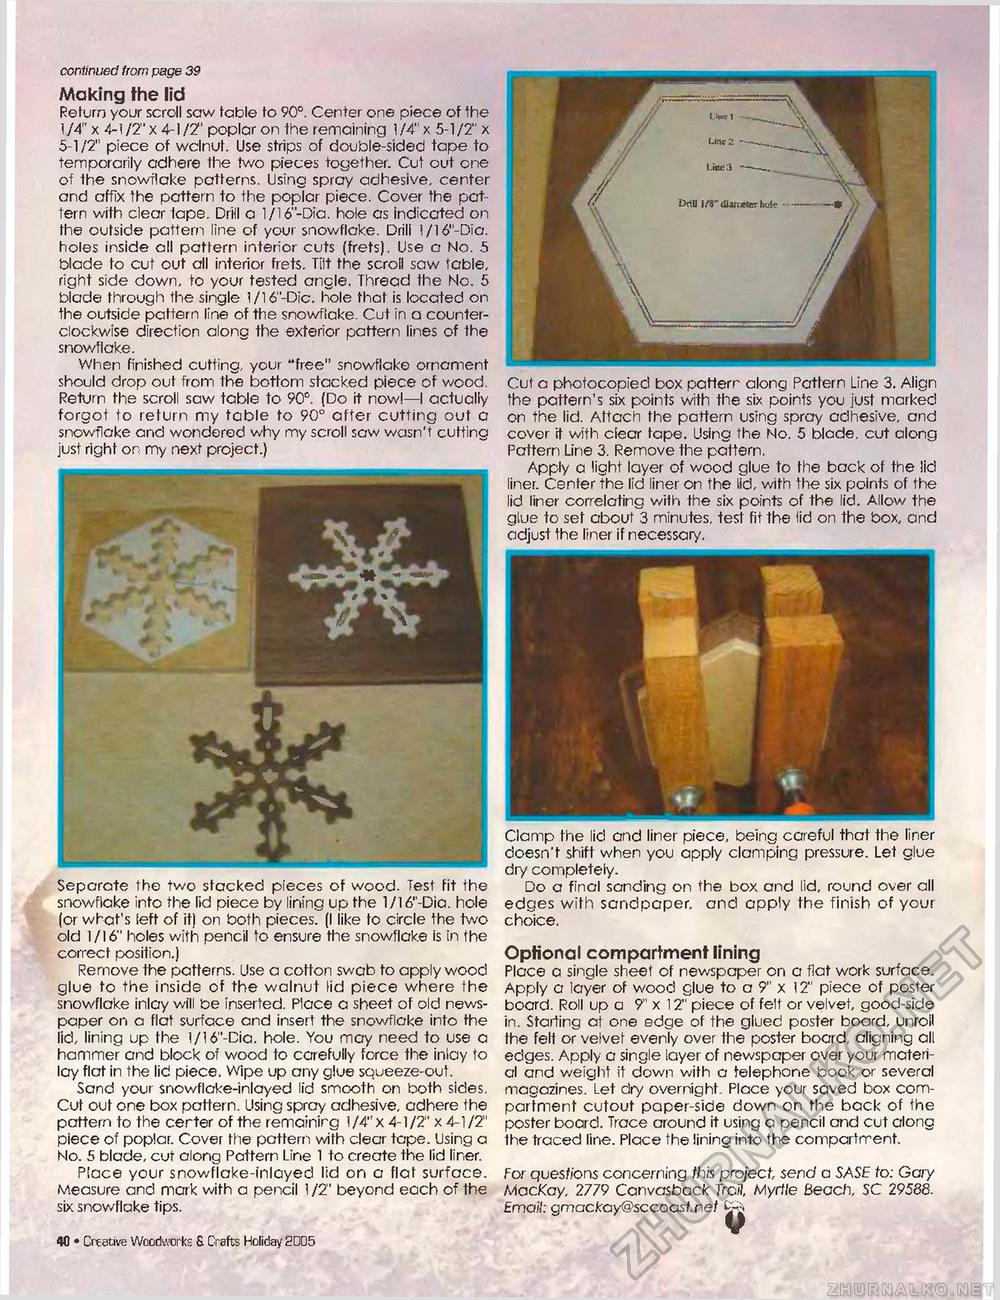 Creative Woodworks  & crafts-111-2005-Holiday,  40